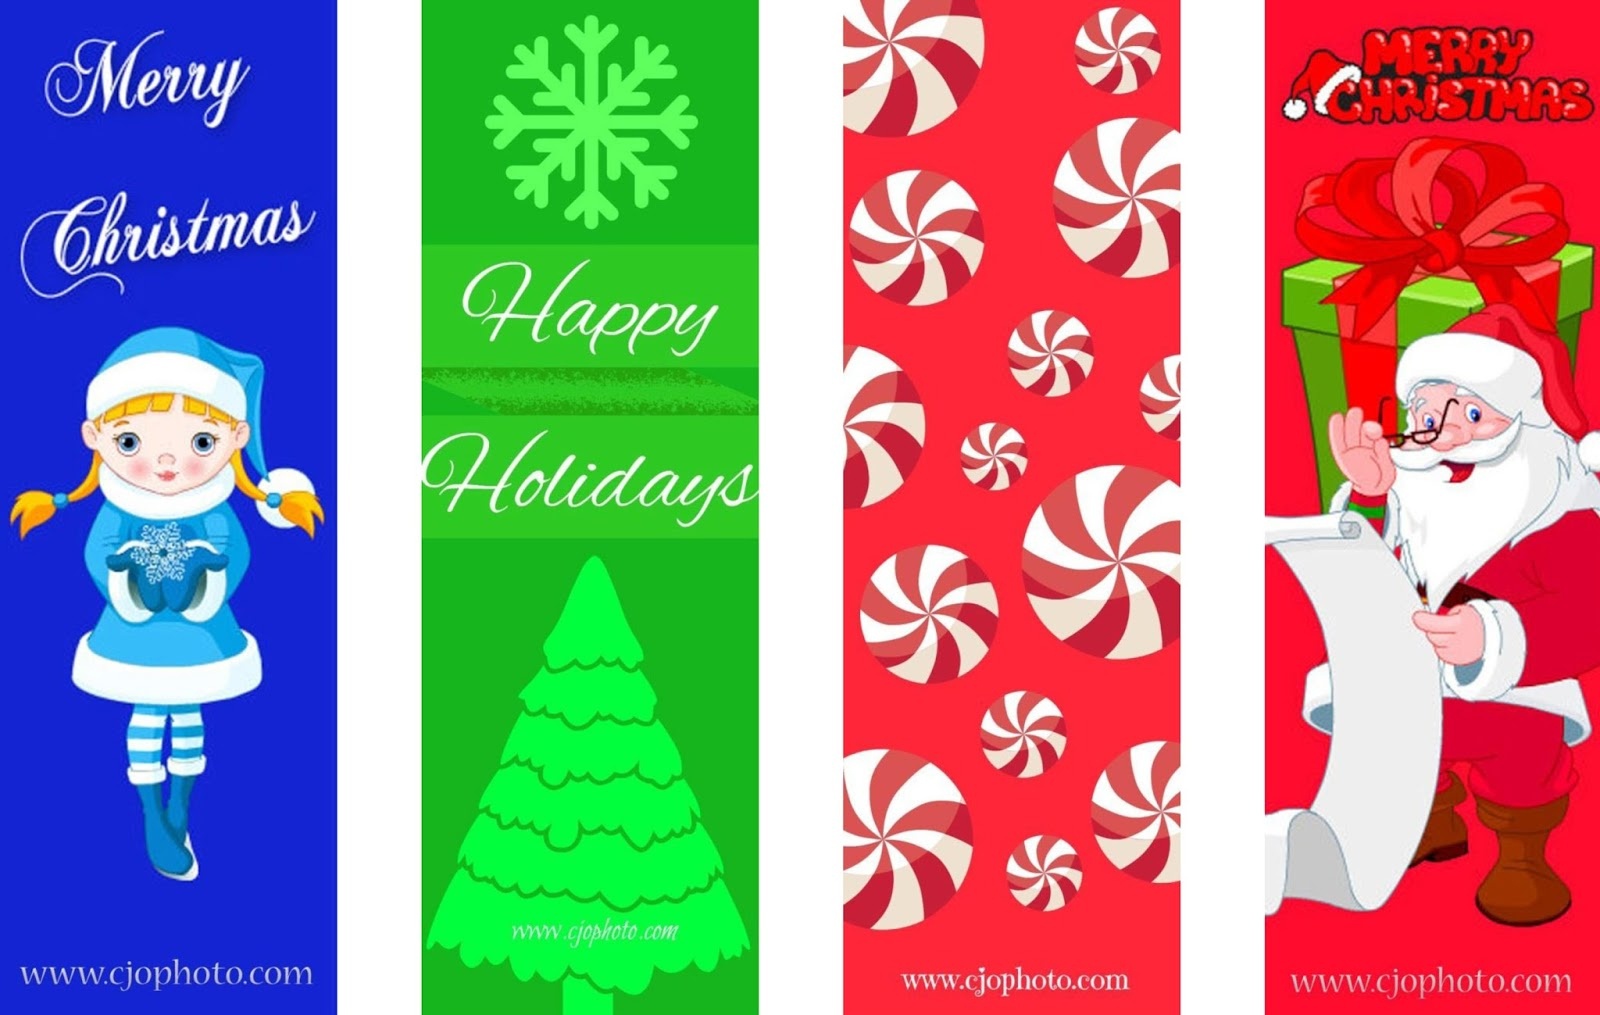 5 Images Of Free Printable Christmas Bookmarks To Color | Crafts - Free ...